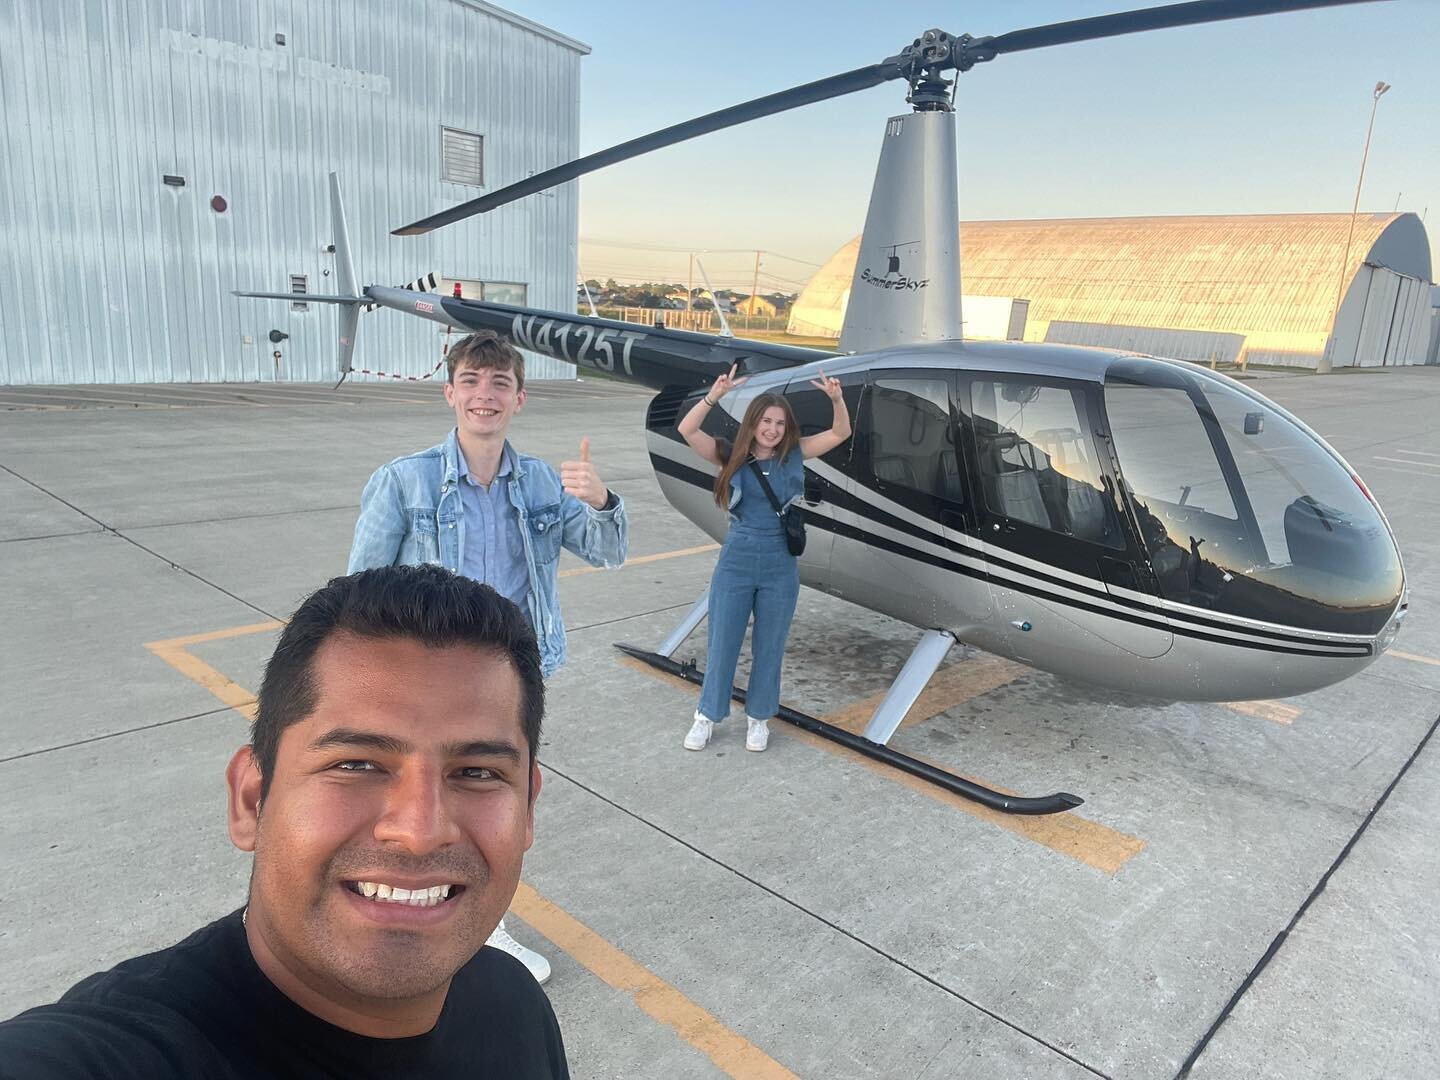 Yesterday was a great time to go fly. Awesome sunset and fireworks afterwards. Good company! With @christianriel and @genevieve. 
Thanks for coming out!🚁🙌🏽🎆🌃